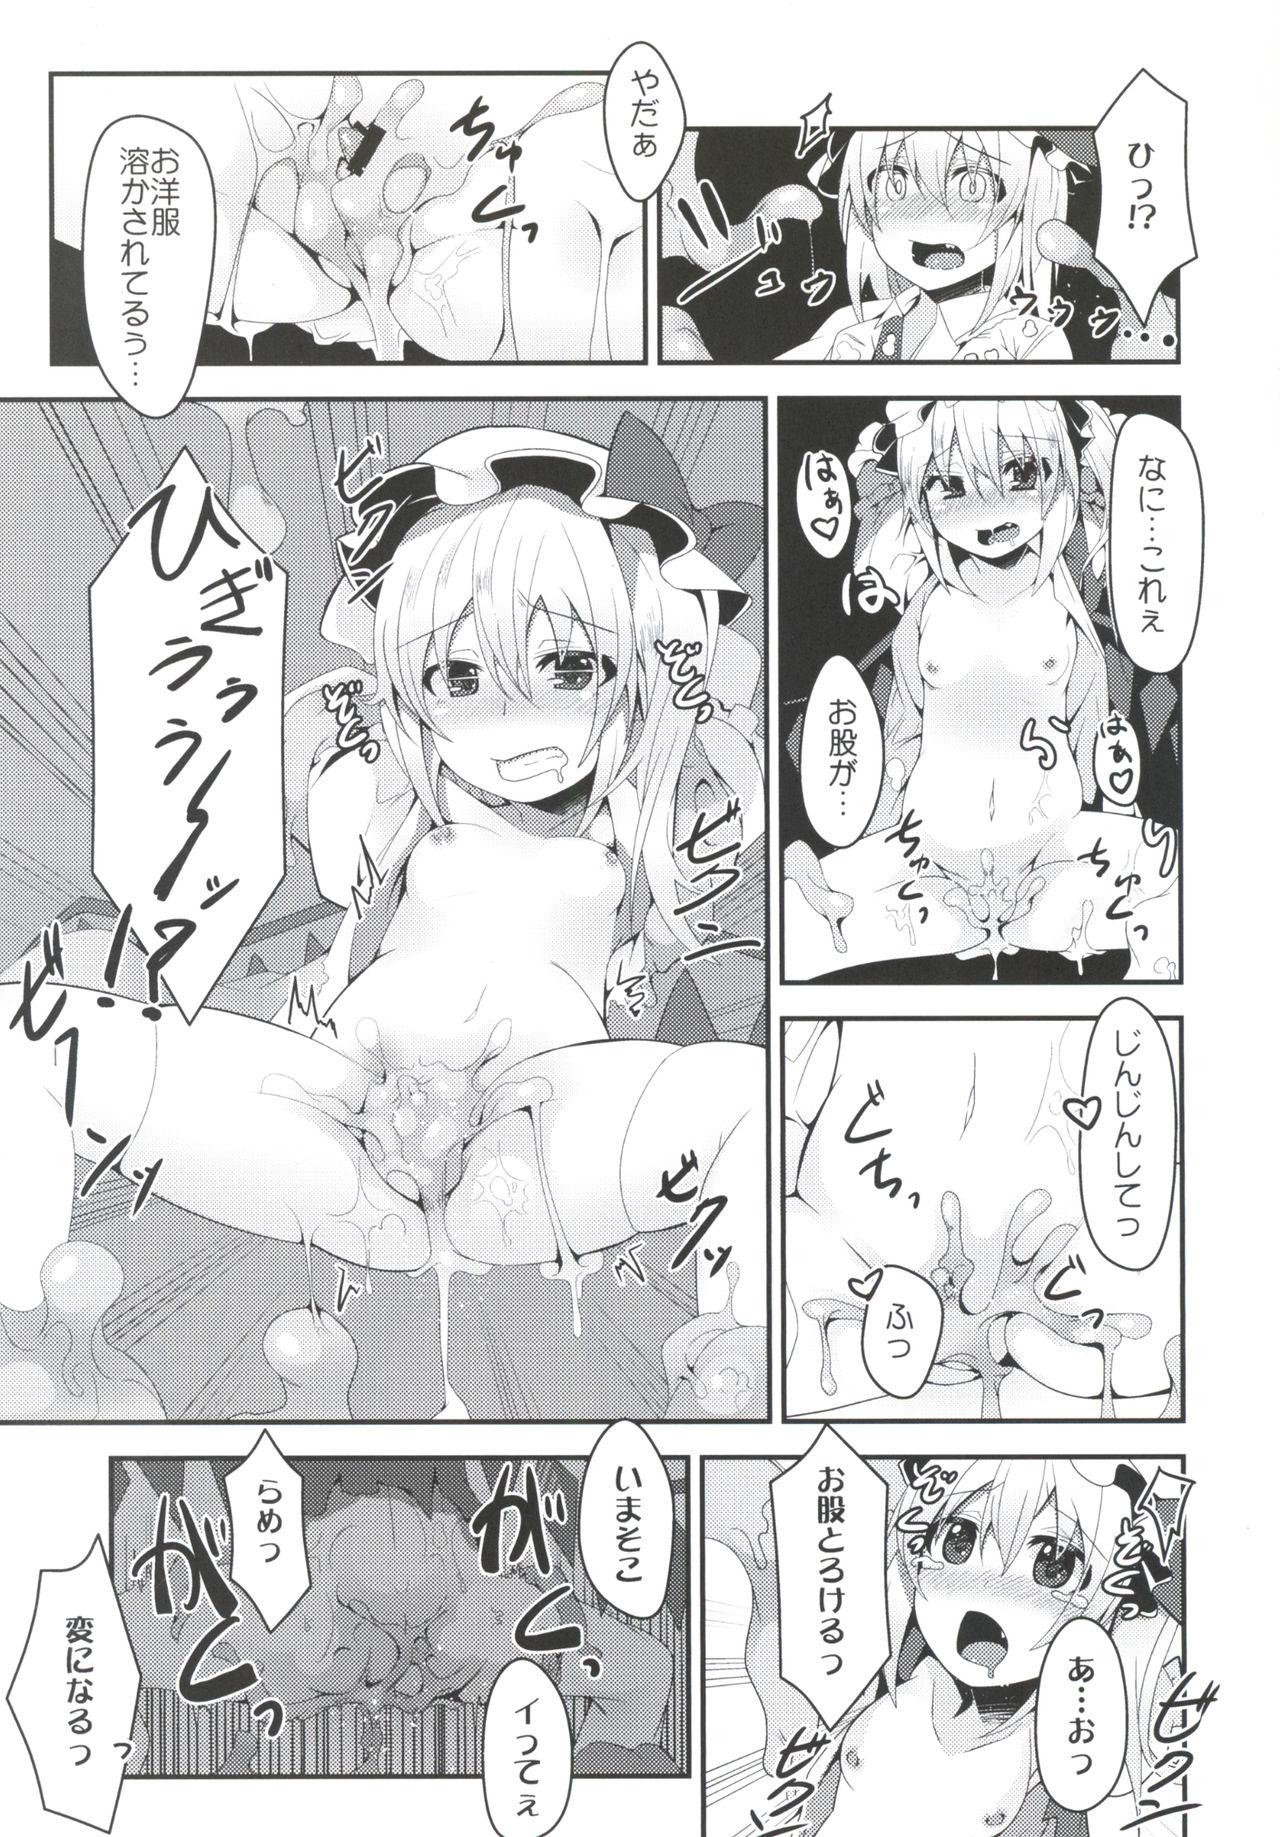 Hand Flan-chan no Ero Trap Dungeon - Touhou project Free Blowjobs - Page 6